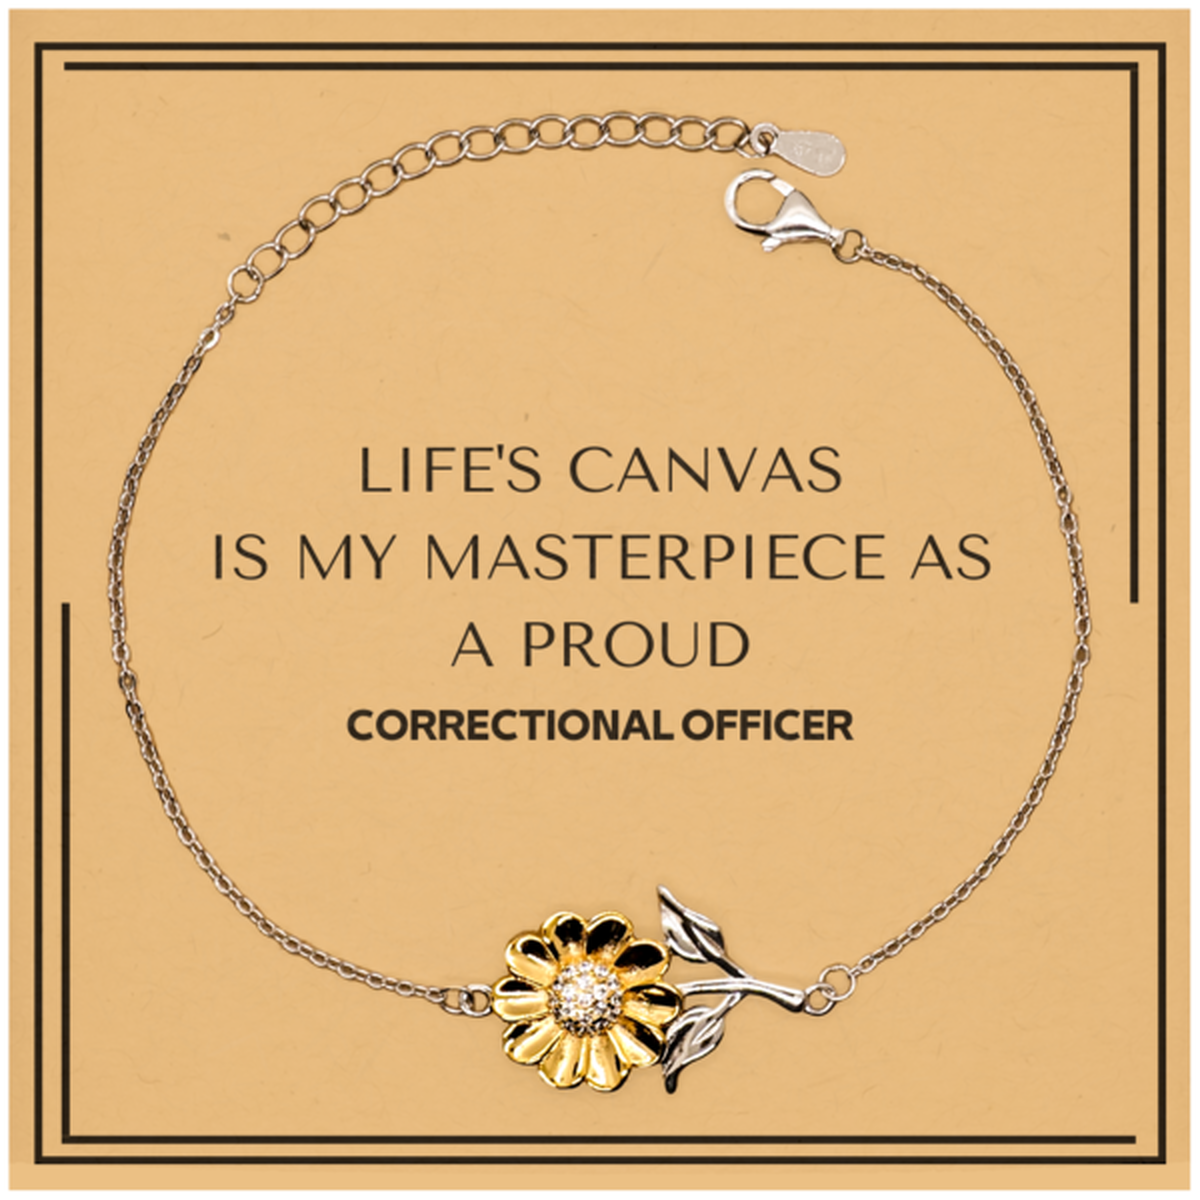 Proud Correctional Officer Gifts, Life's canvas is my masterpiece, Epic Birthday Christmas Unique Sunflower Bracelet For Correctional Officer, Coworkers, Men, Women, Friends